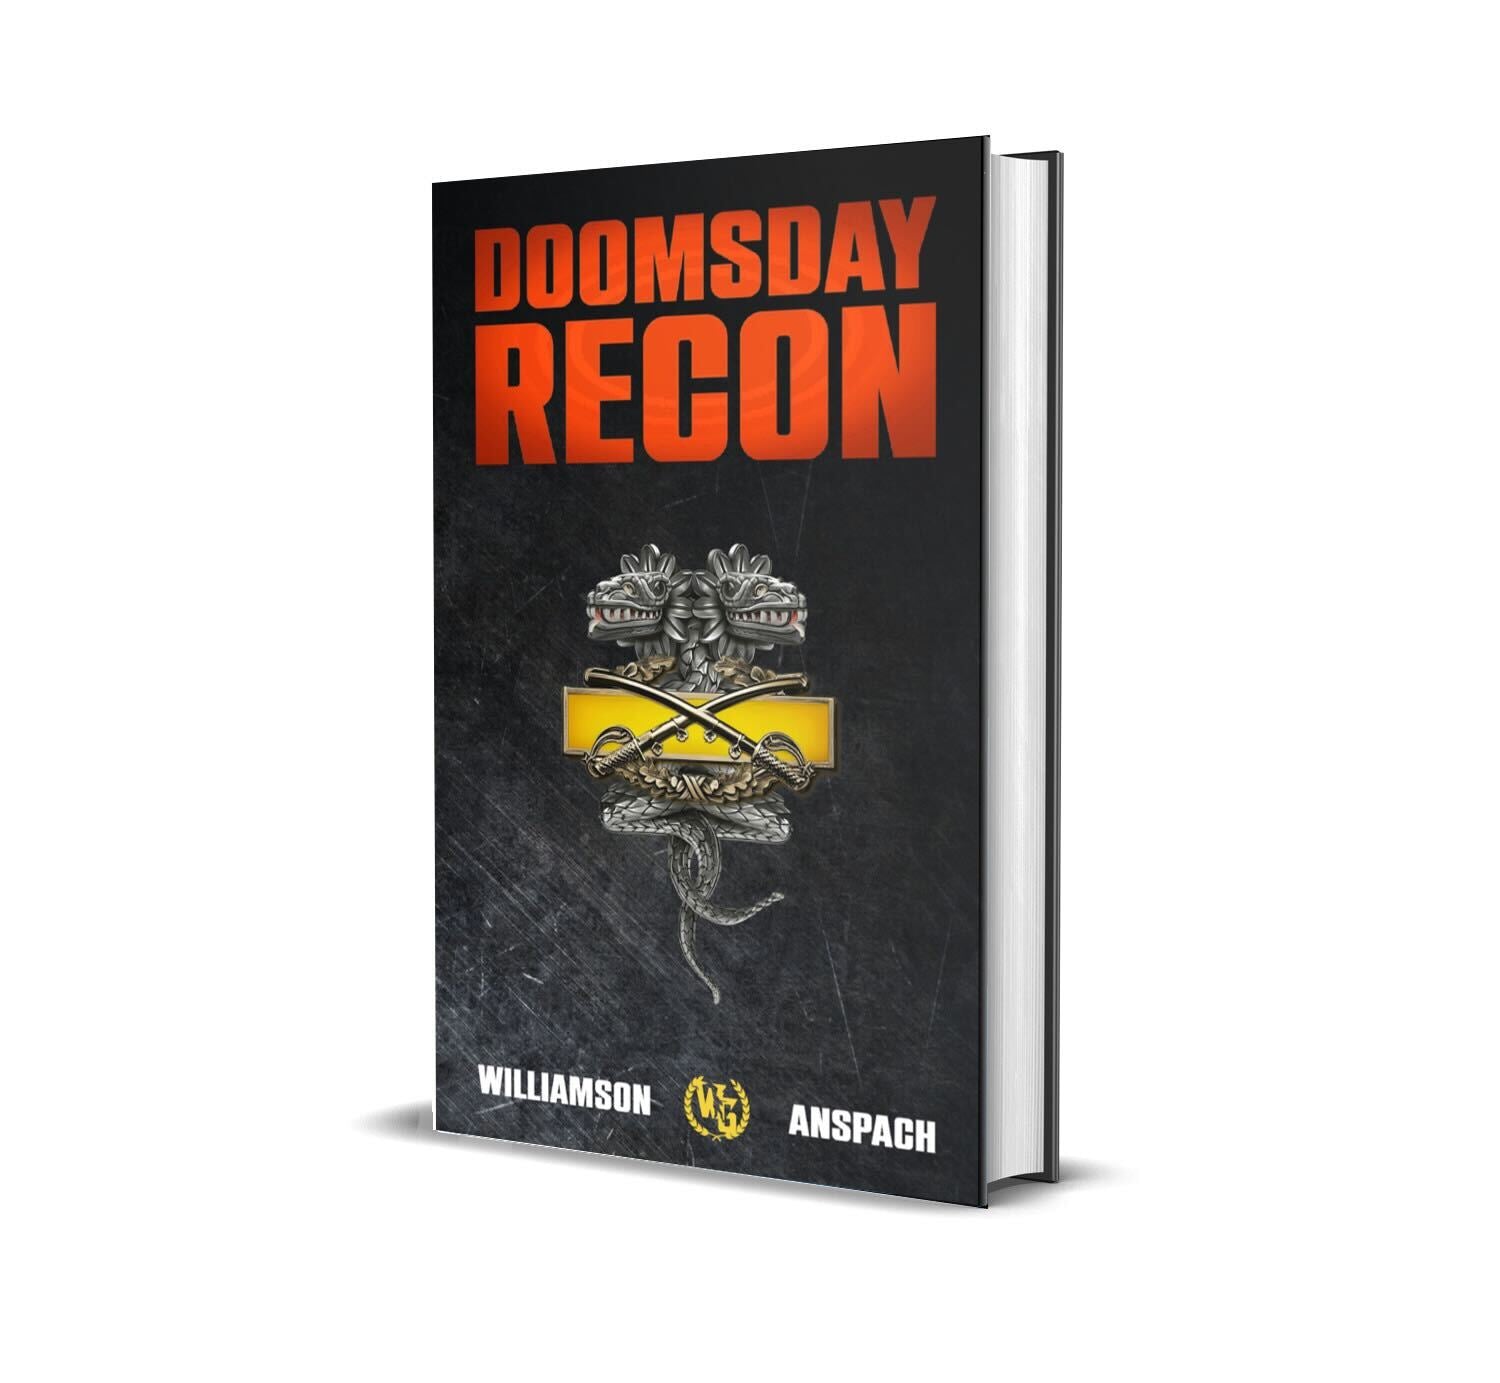 Doomsday Recon Autographed Hardcover